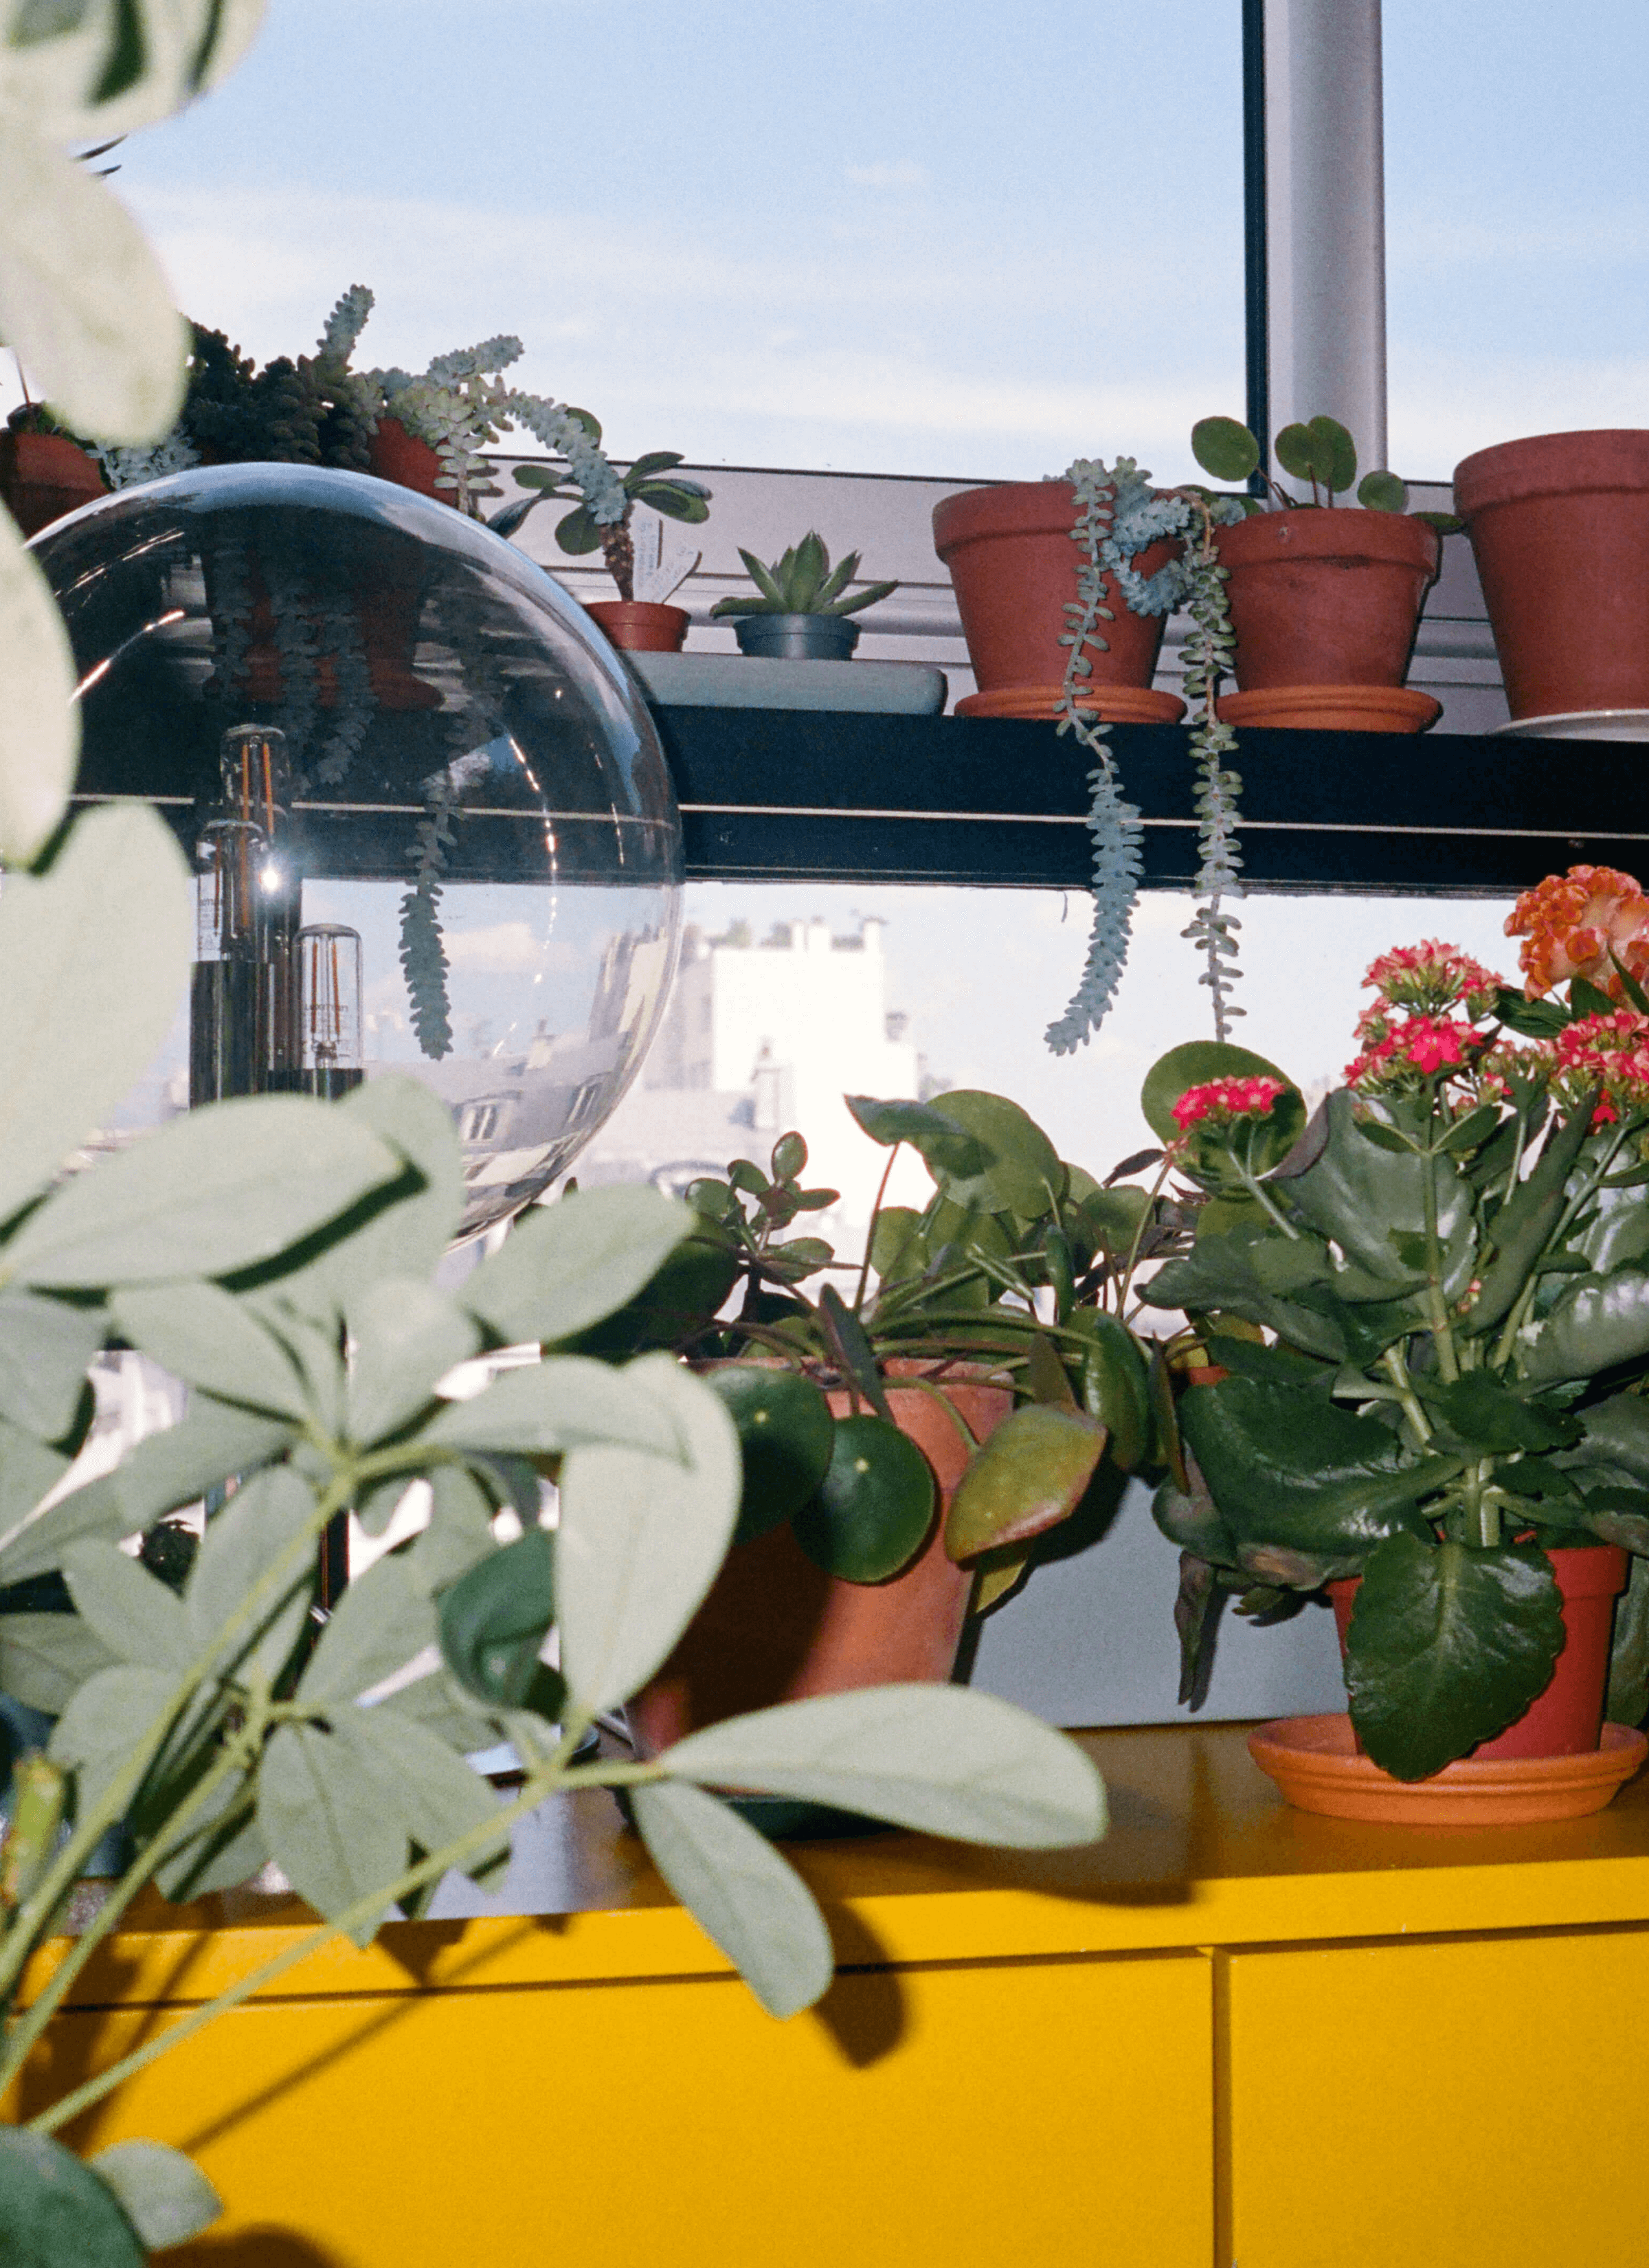 A collection of potted plants, a Chinese money plant, a red Kalanchoe plant, succulents, etc. on the window shelf with a big light bulb.